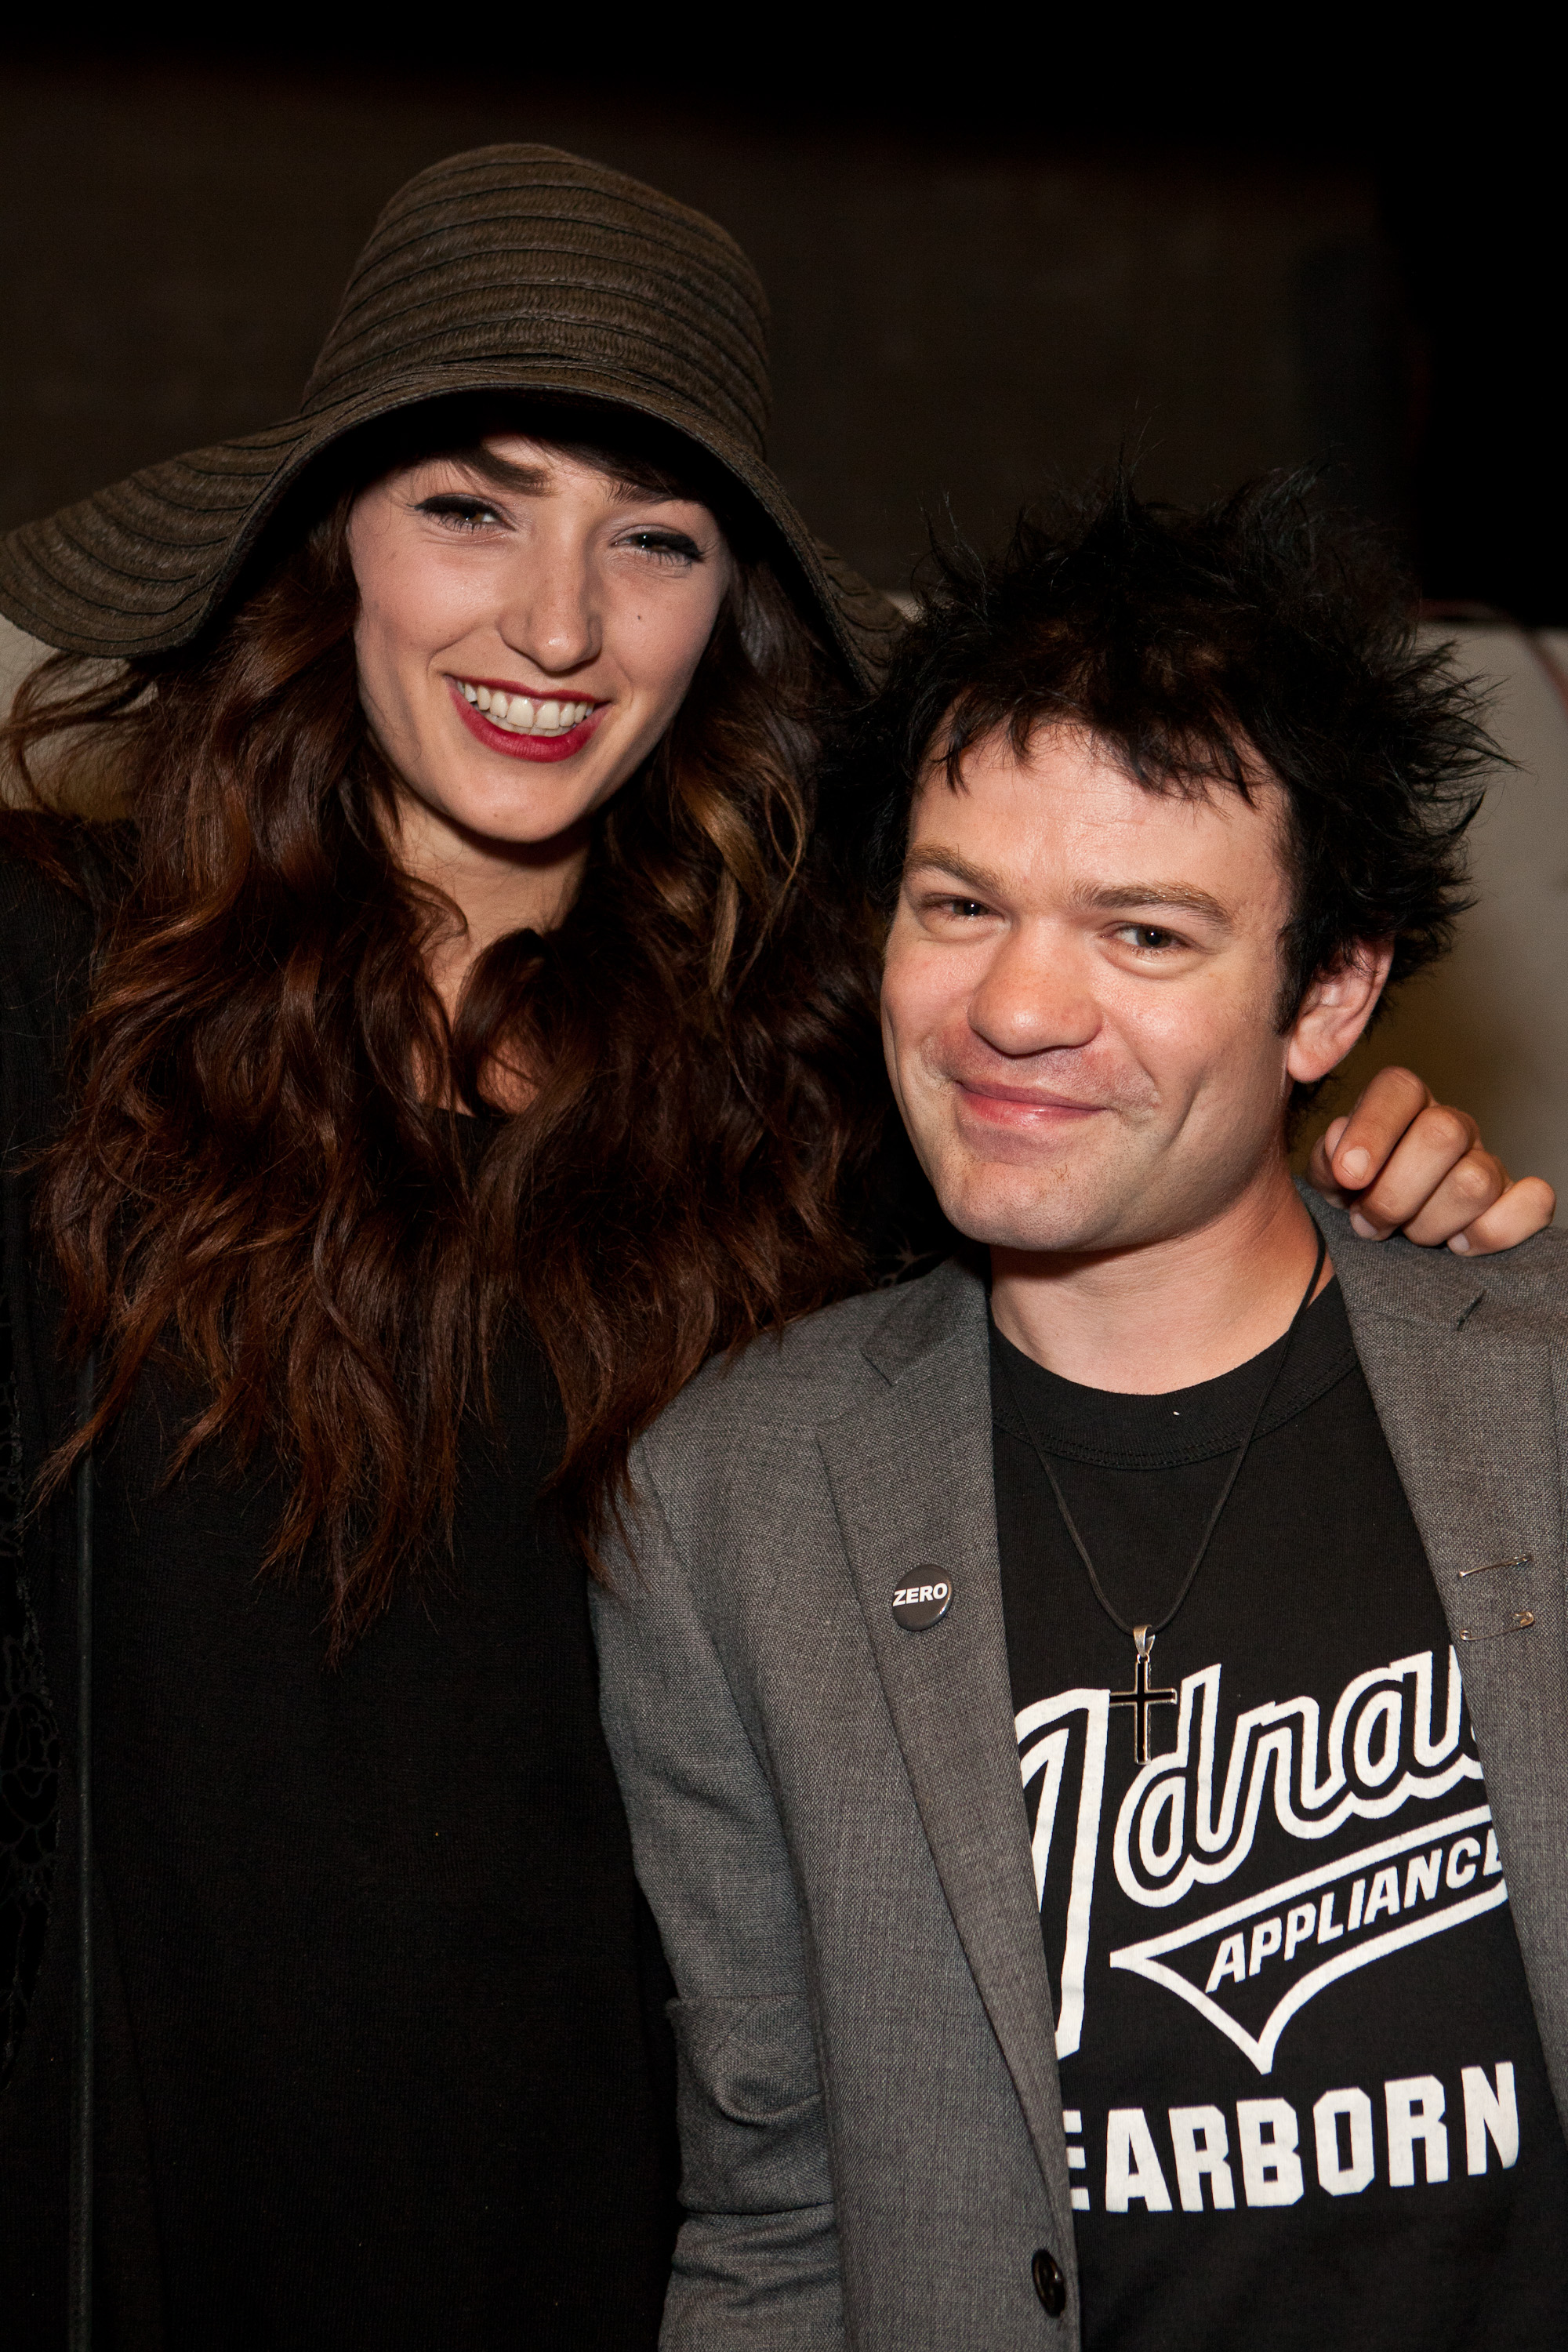 Model Ariana Cooper (L) and vocalist Deryck Whibley of Sum 41 (R) attend the soft opening of The Writers Room, on October 13, 2011, in Los Angeles, California. | Source: Getty Images